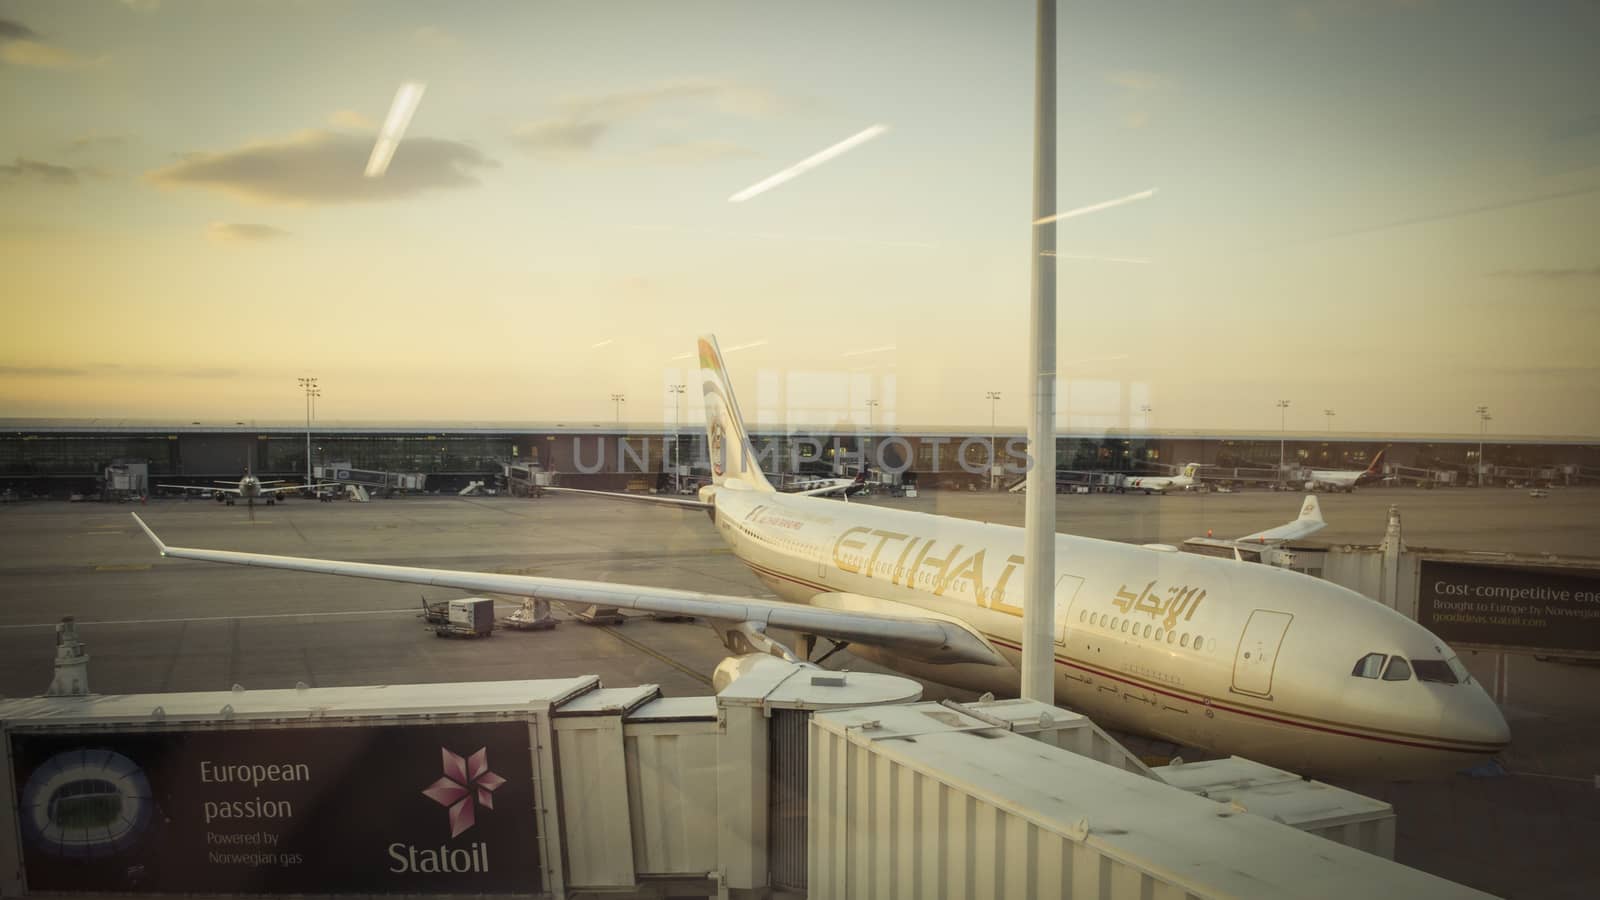 Etihad Airways airplane parked at the gates of the airport uring sunset by kb79